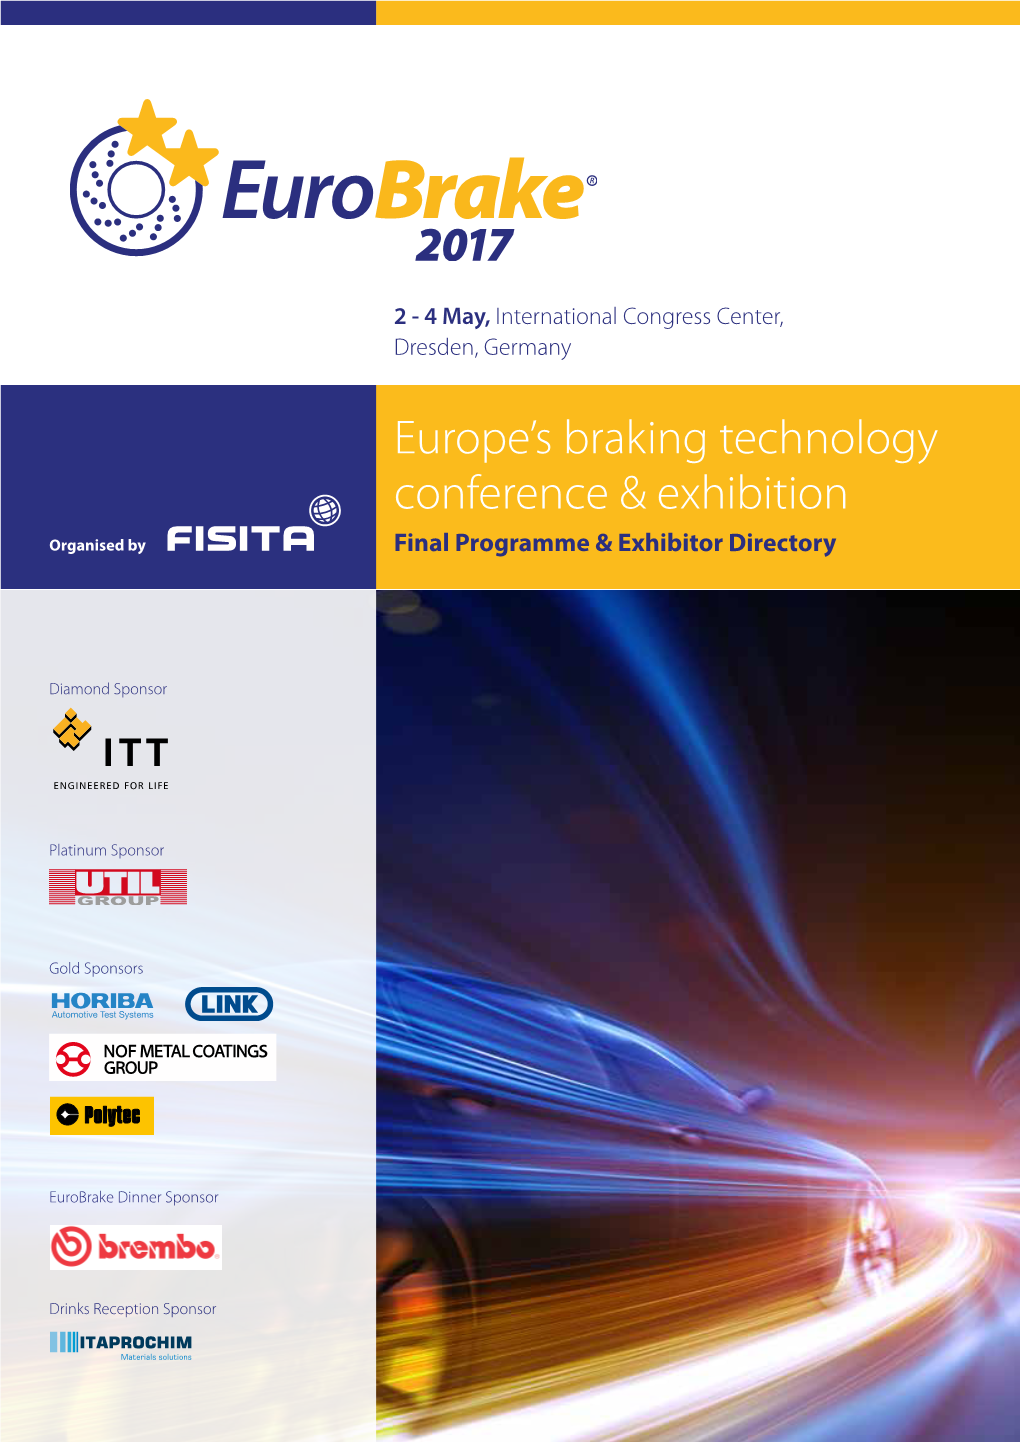 Europe's Braking Technology Conference & Exhibition